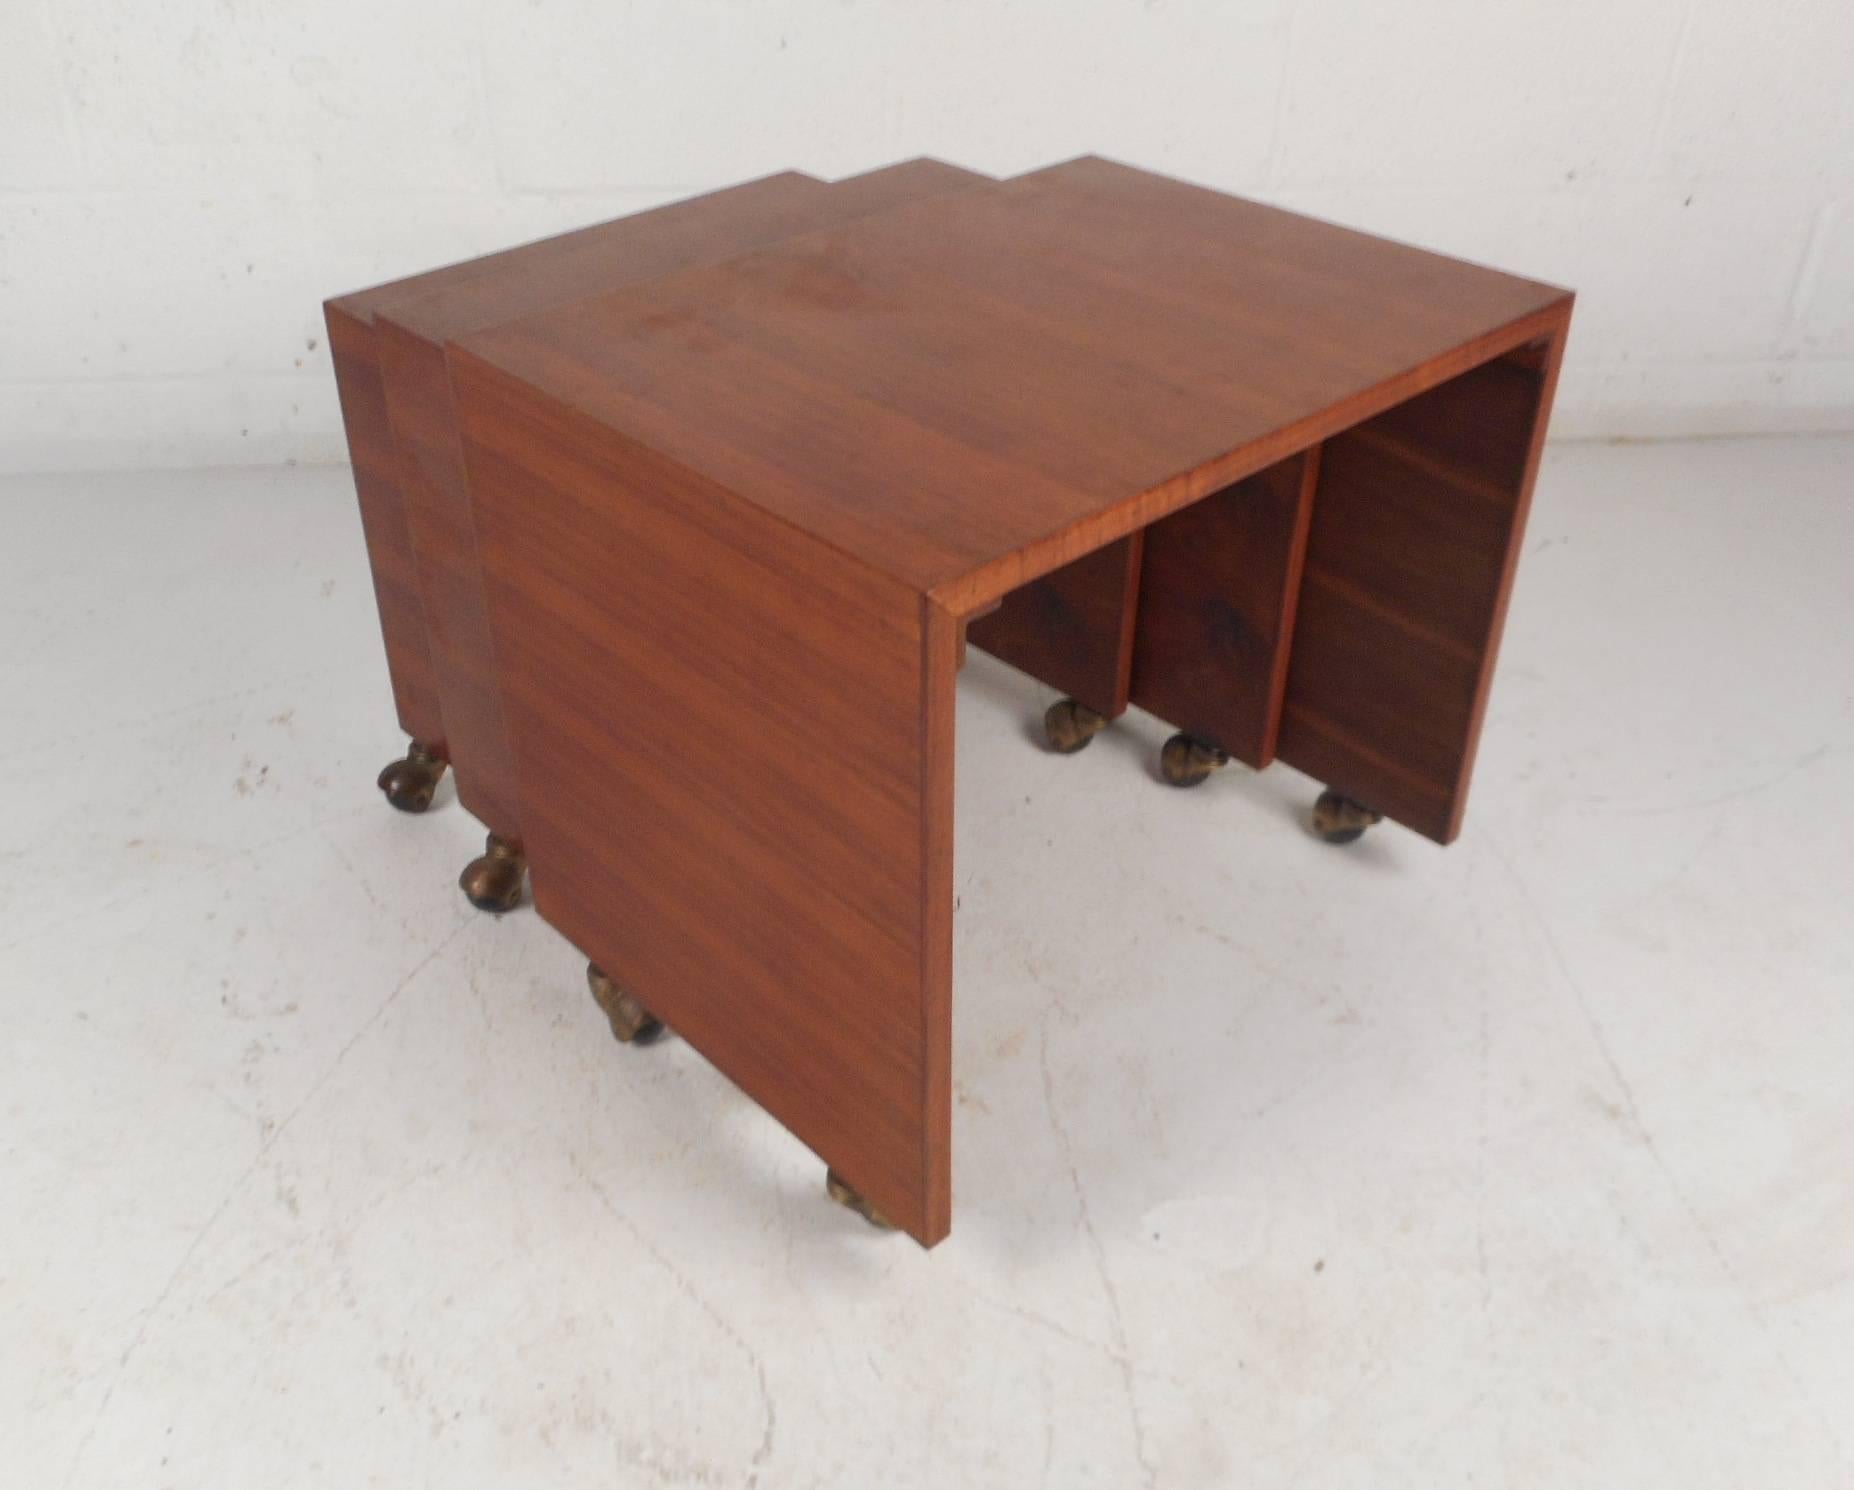 This beautiful vintage modern set of three nesting tables feature elegant walnut wood grain and a waterfall style shape. This heavy and solid set have castors providing added convenience. These unique Mid-Century pieces slide comfortably on top of